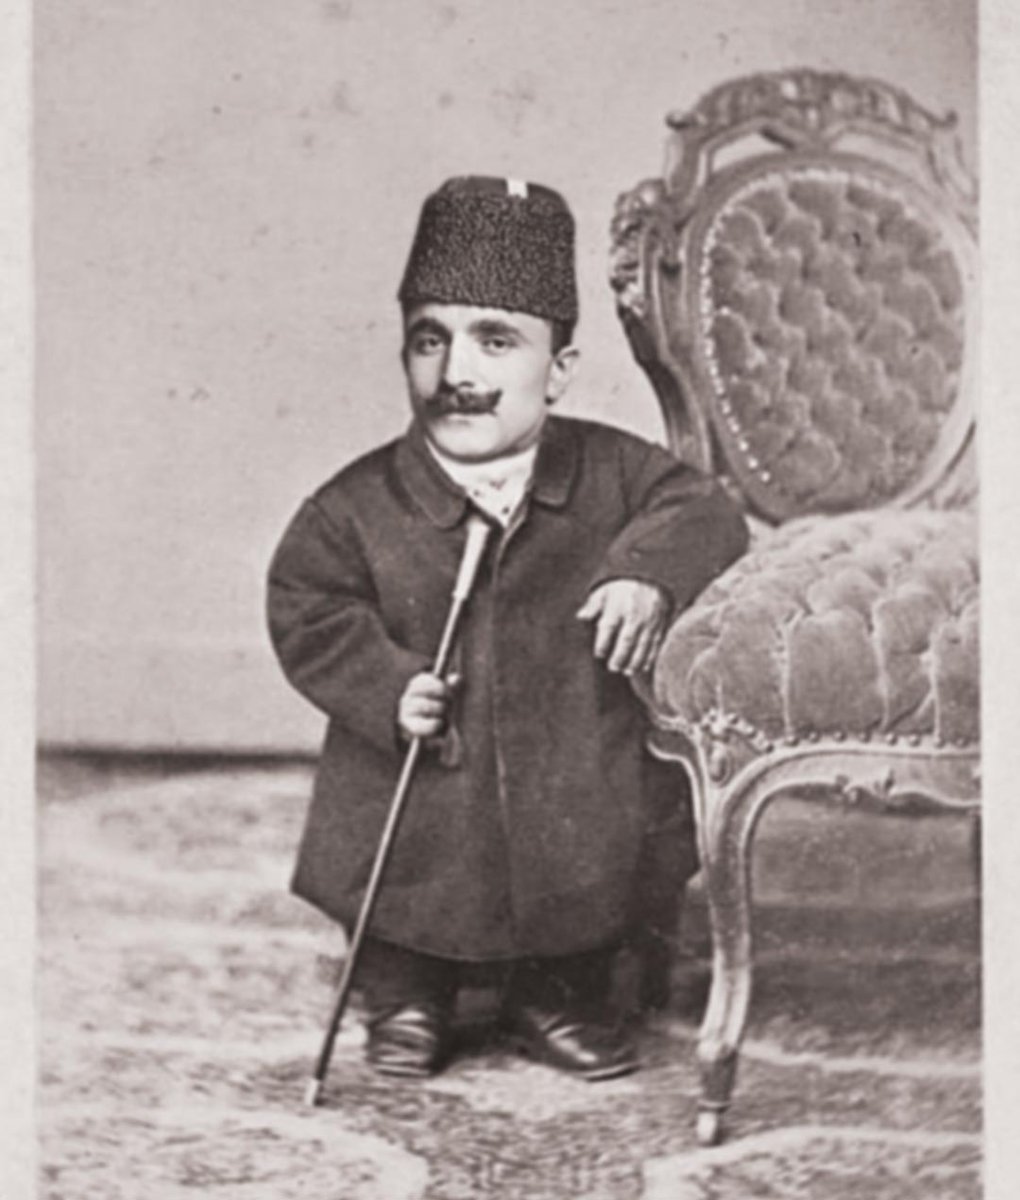 Unfortunately Enver Pasha had Sarcopenia.  
'Sarcopenia: Decrease in muscle mass, which leads to weakness and frailty and also a decrease in height.' 
 Last picture of Enver Pasha before Melkumov placed him under a marble.